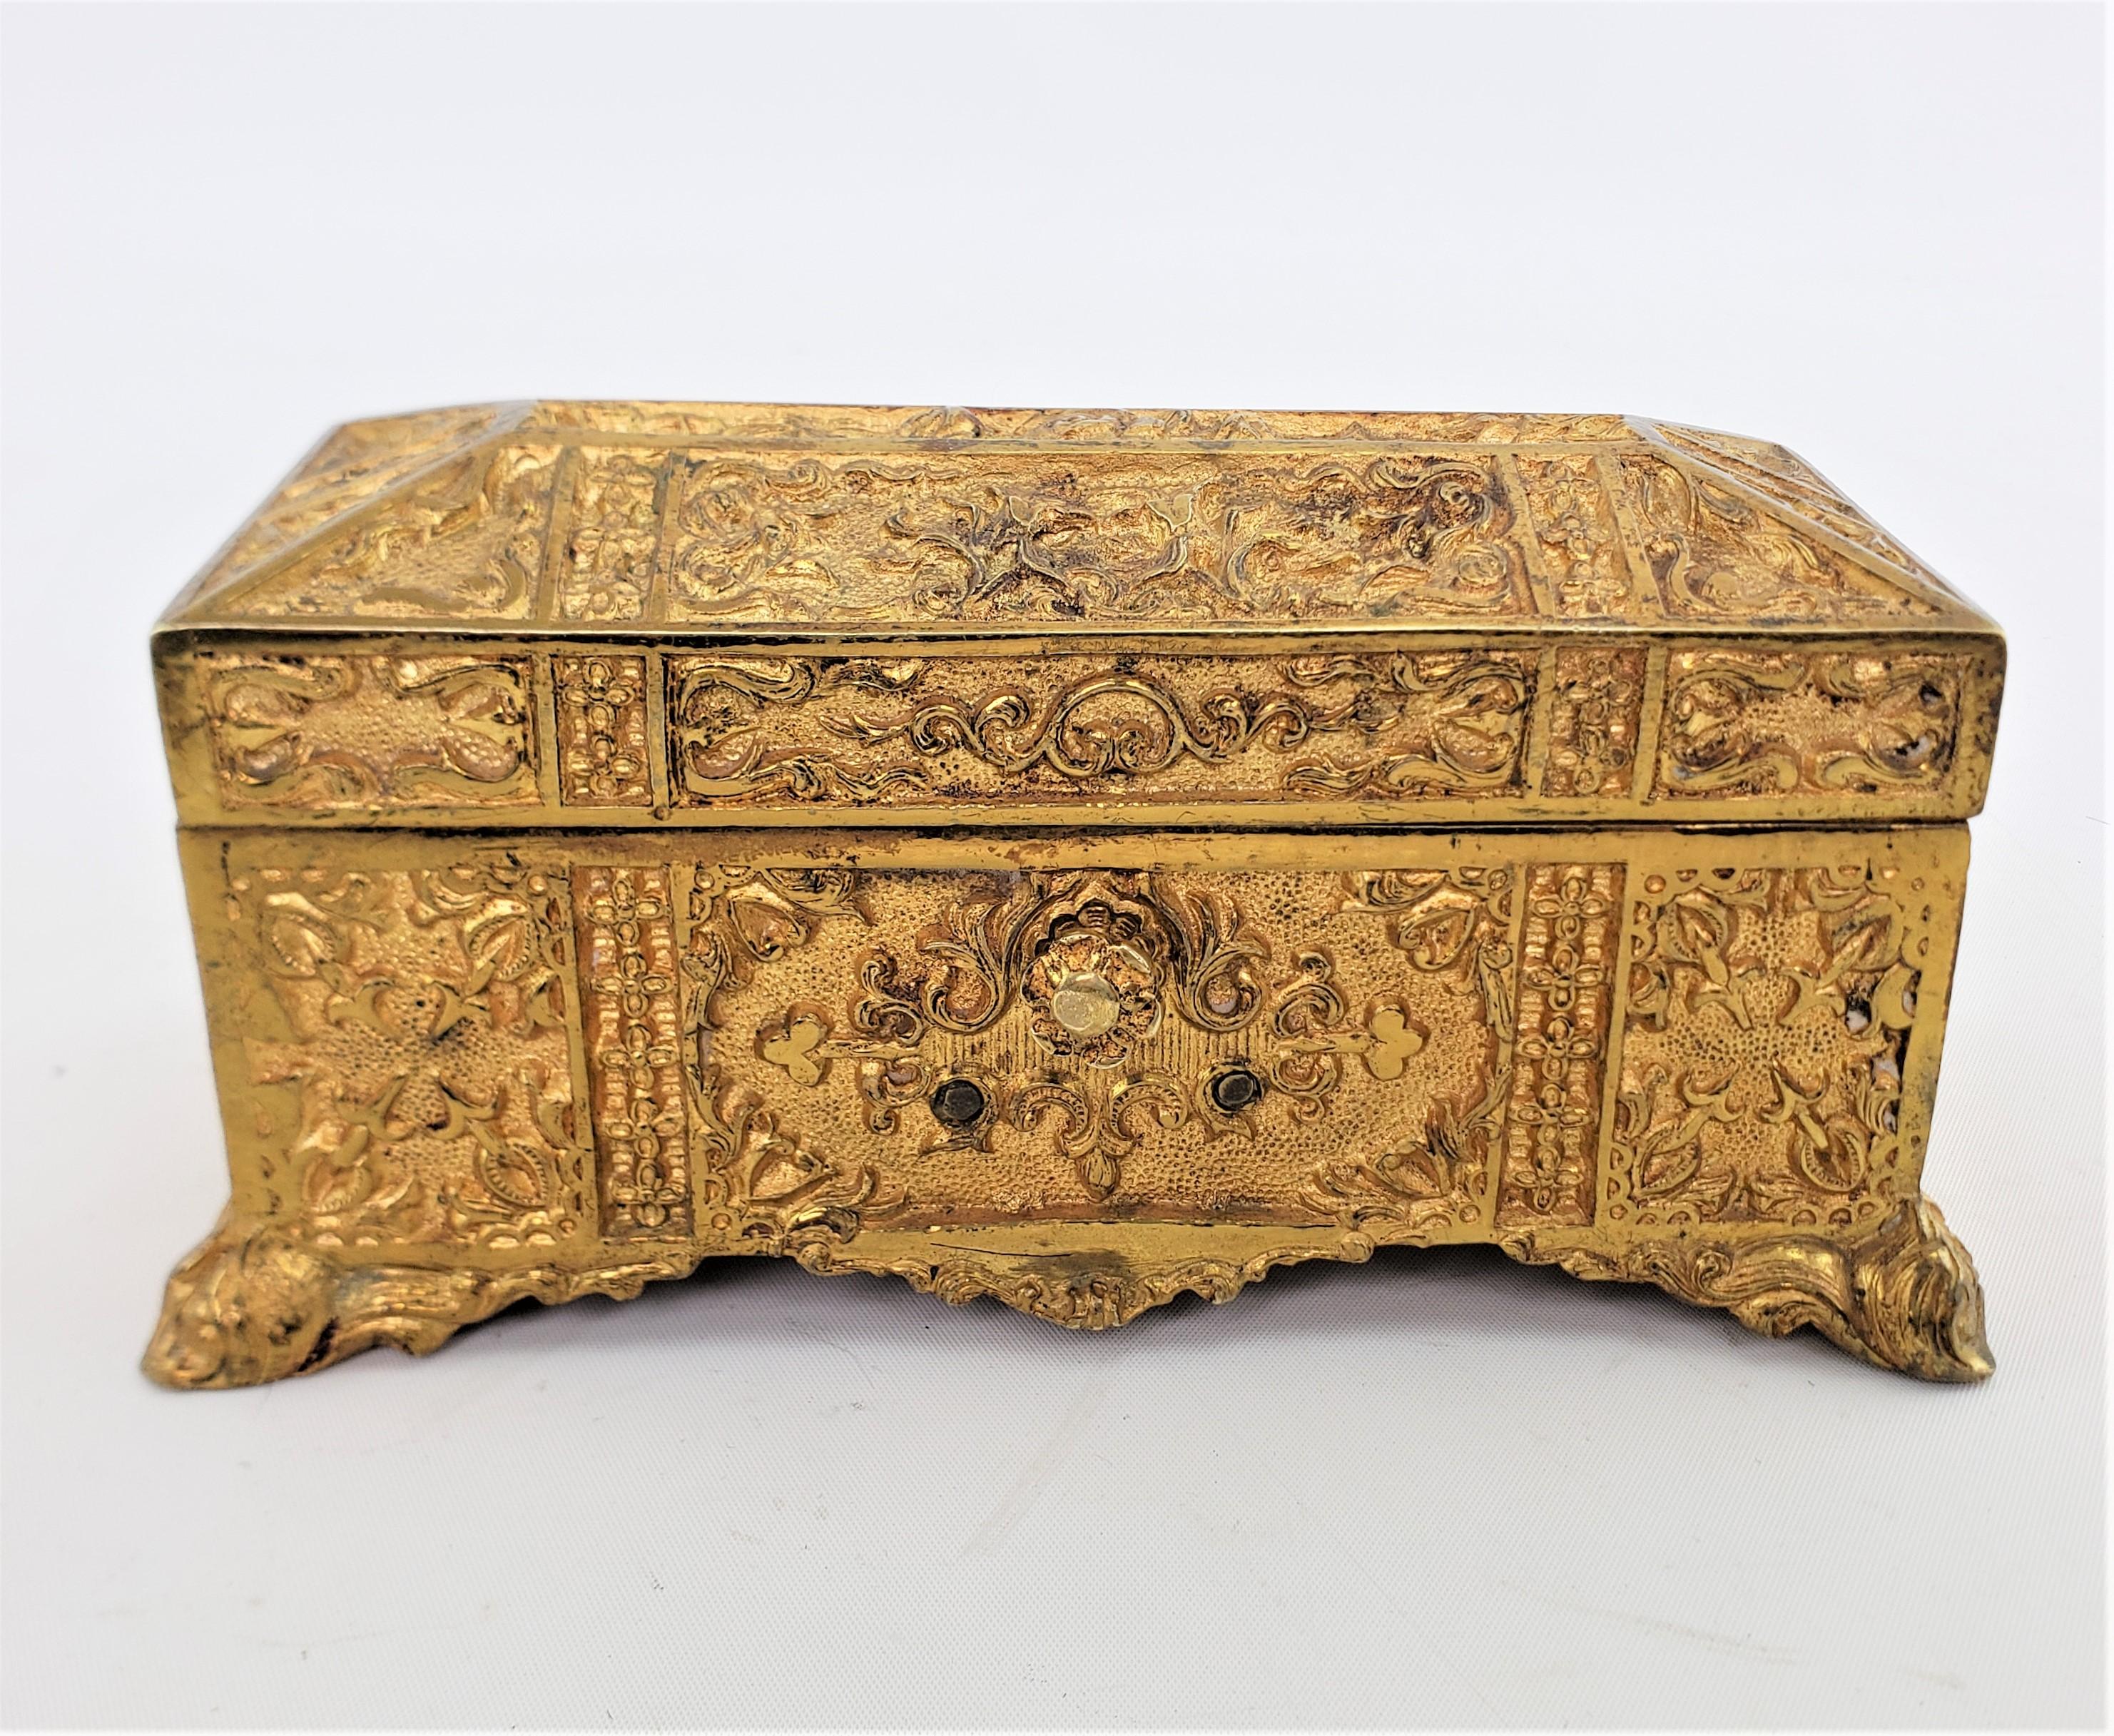 Antique Gilt Bronze Decorative Jewelry Box or Casket with Floral Decoration In Good Condition For Sale In Hamilton, Ontario